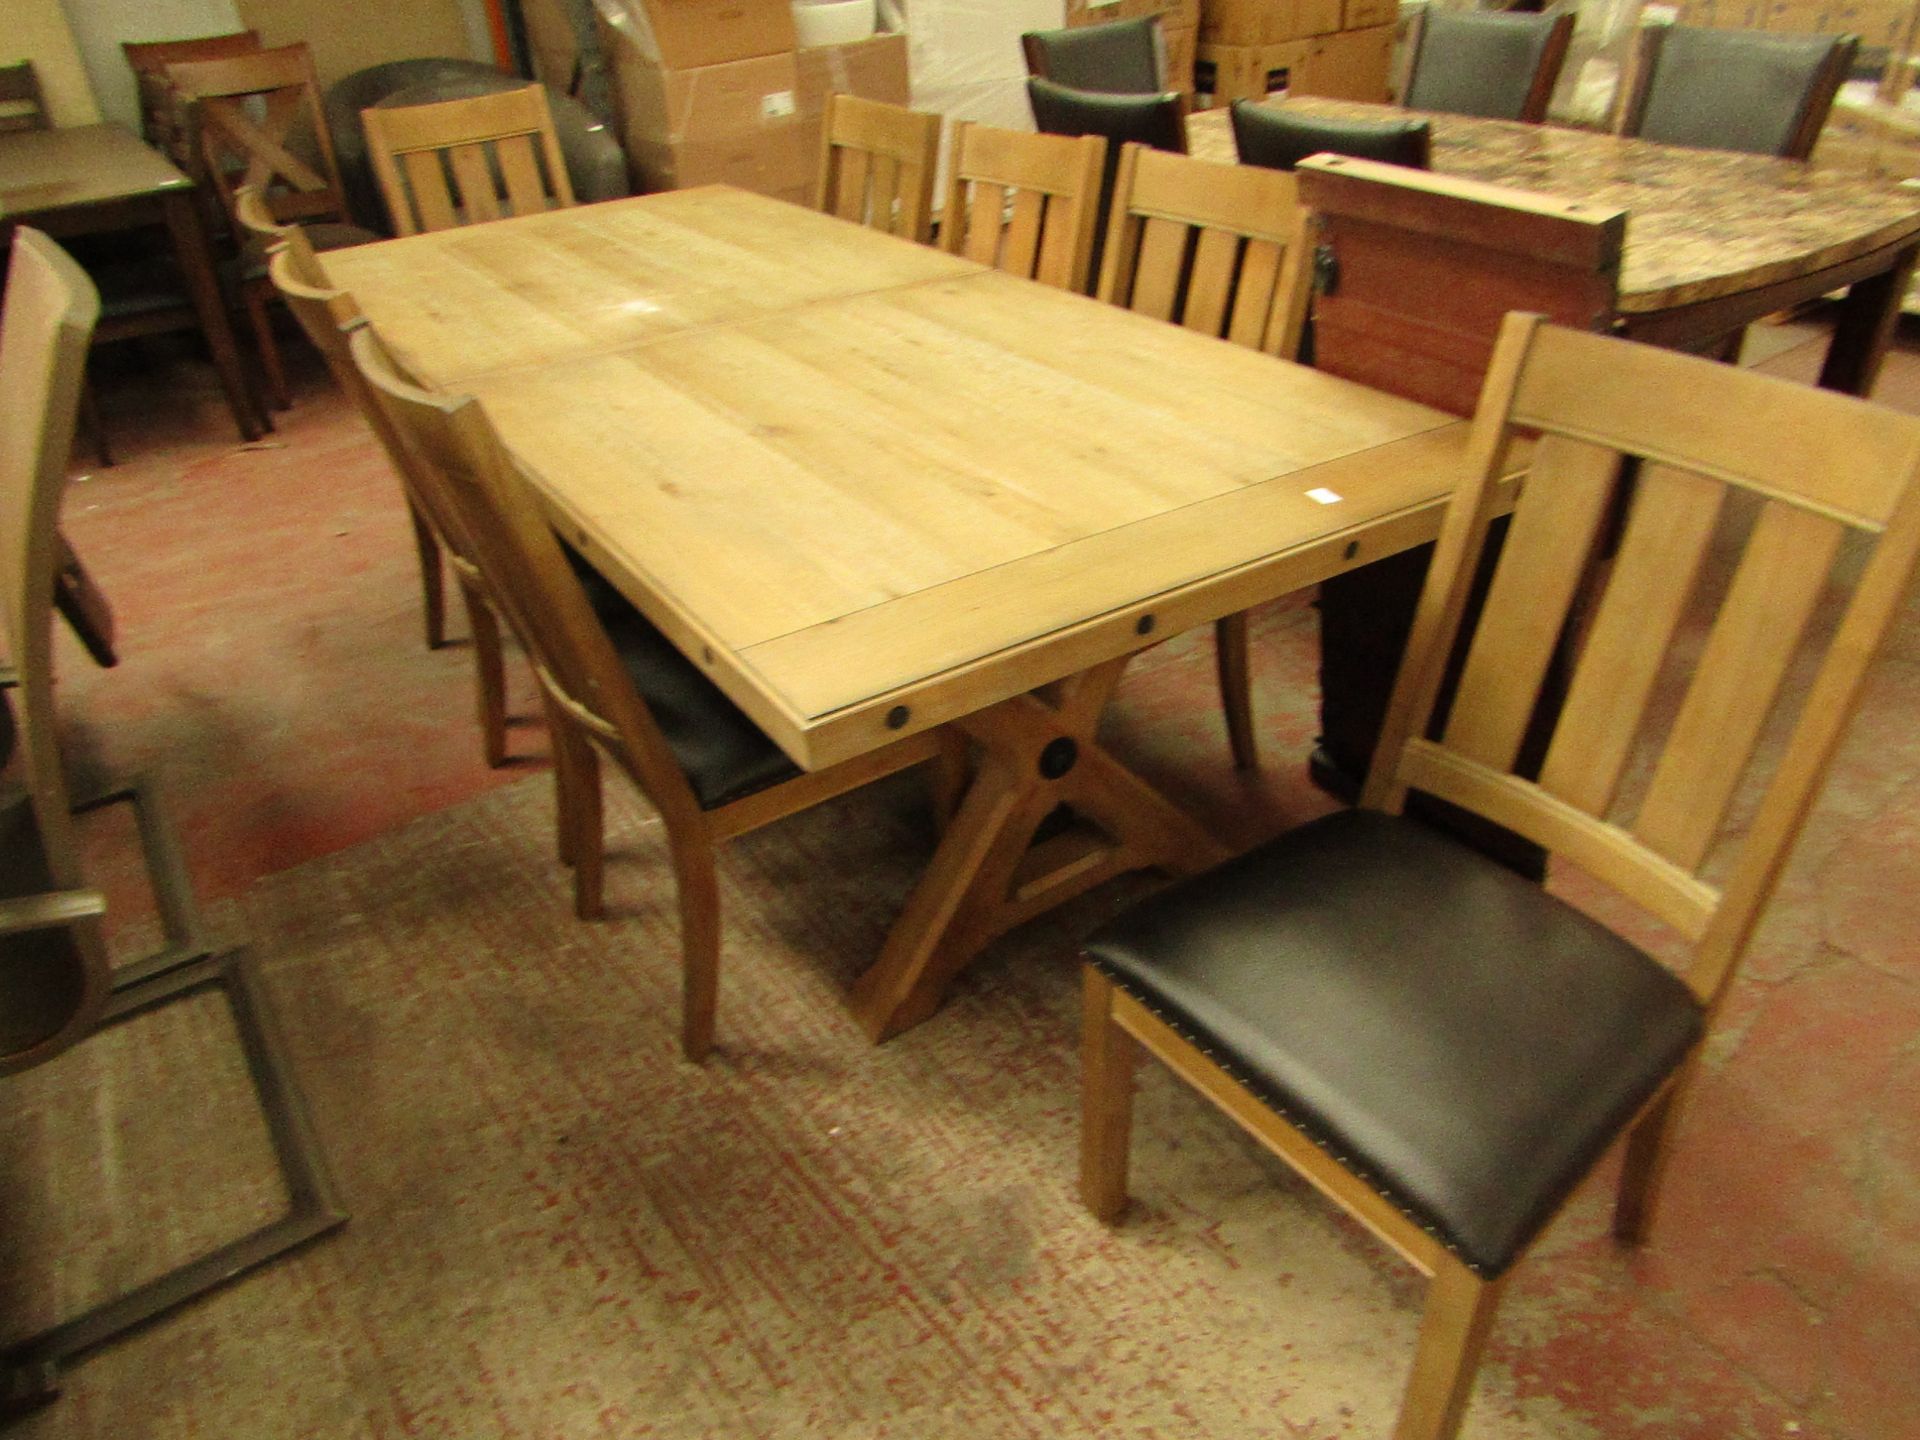 Chattanoga extending 8 seater dinign table with 8 dining chairs, RRP £1499, some marks down one edge